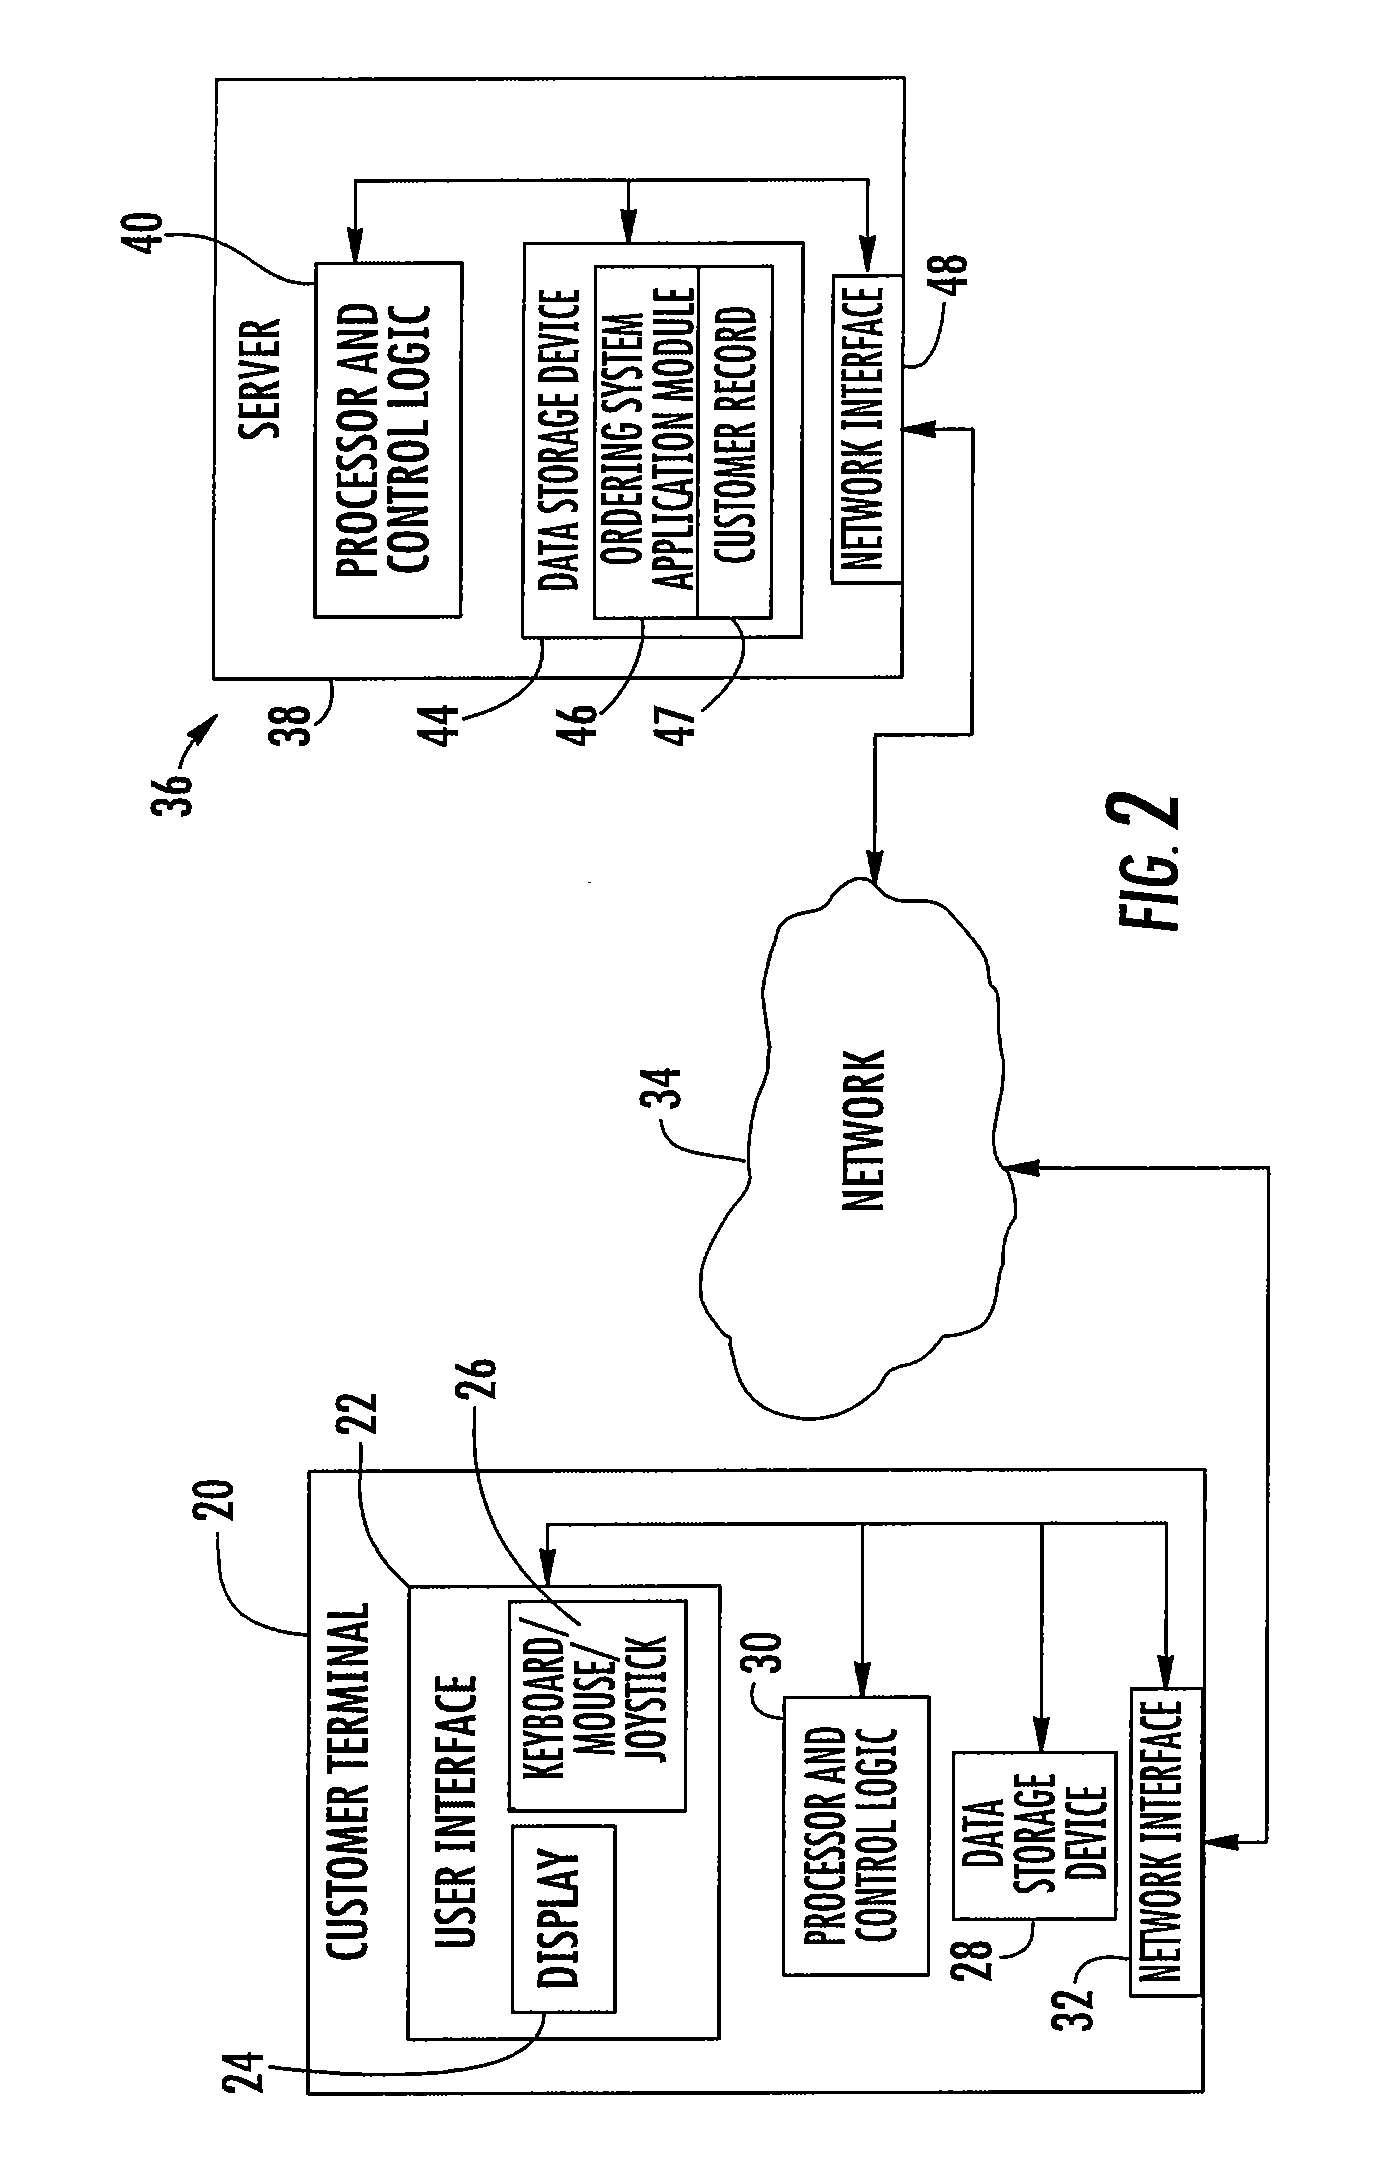 Method and apparatus for a product ordering system